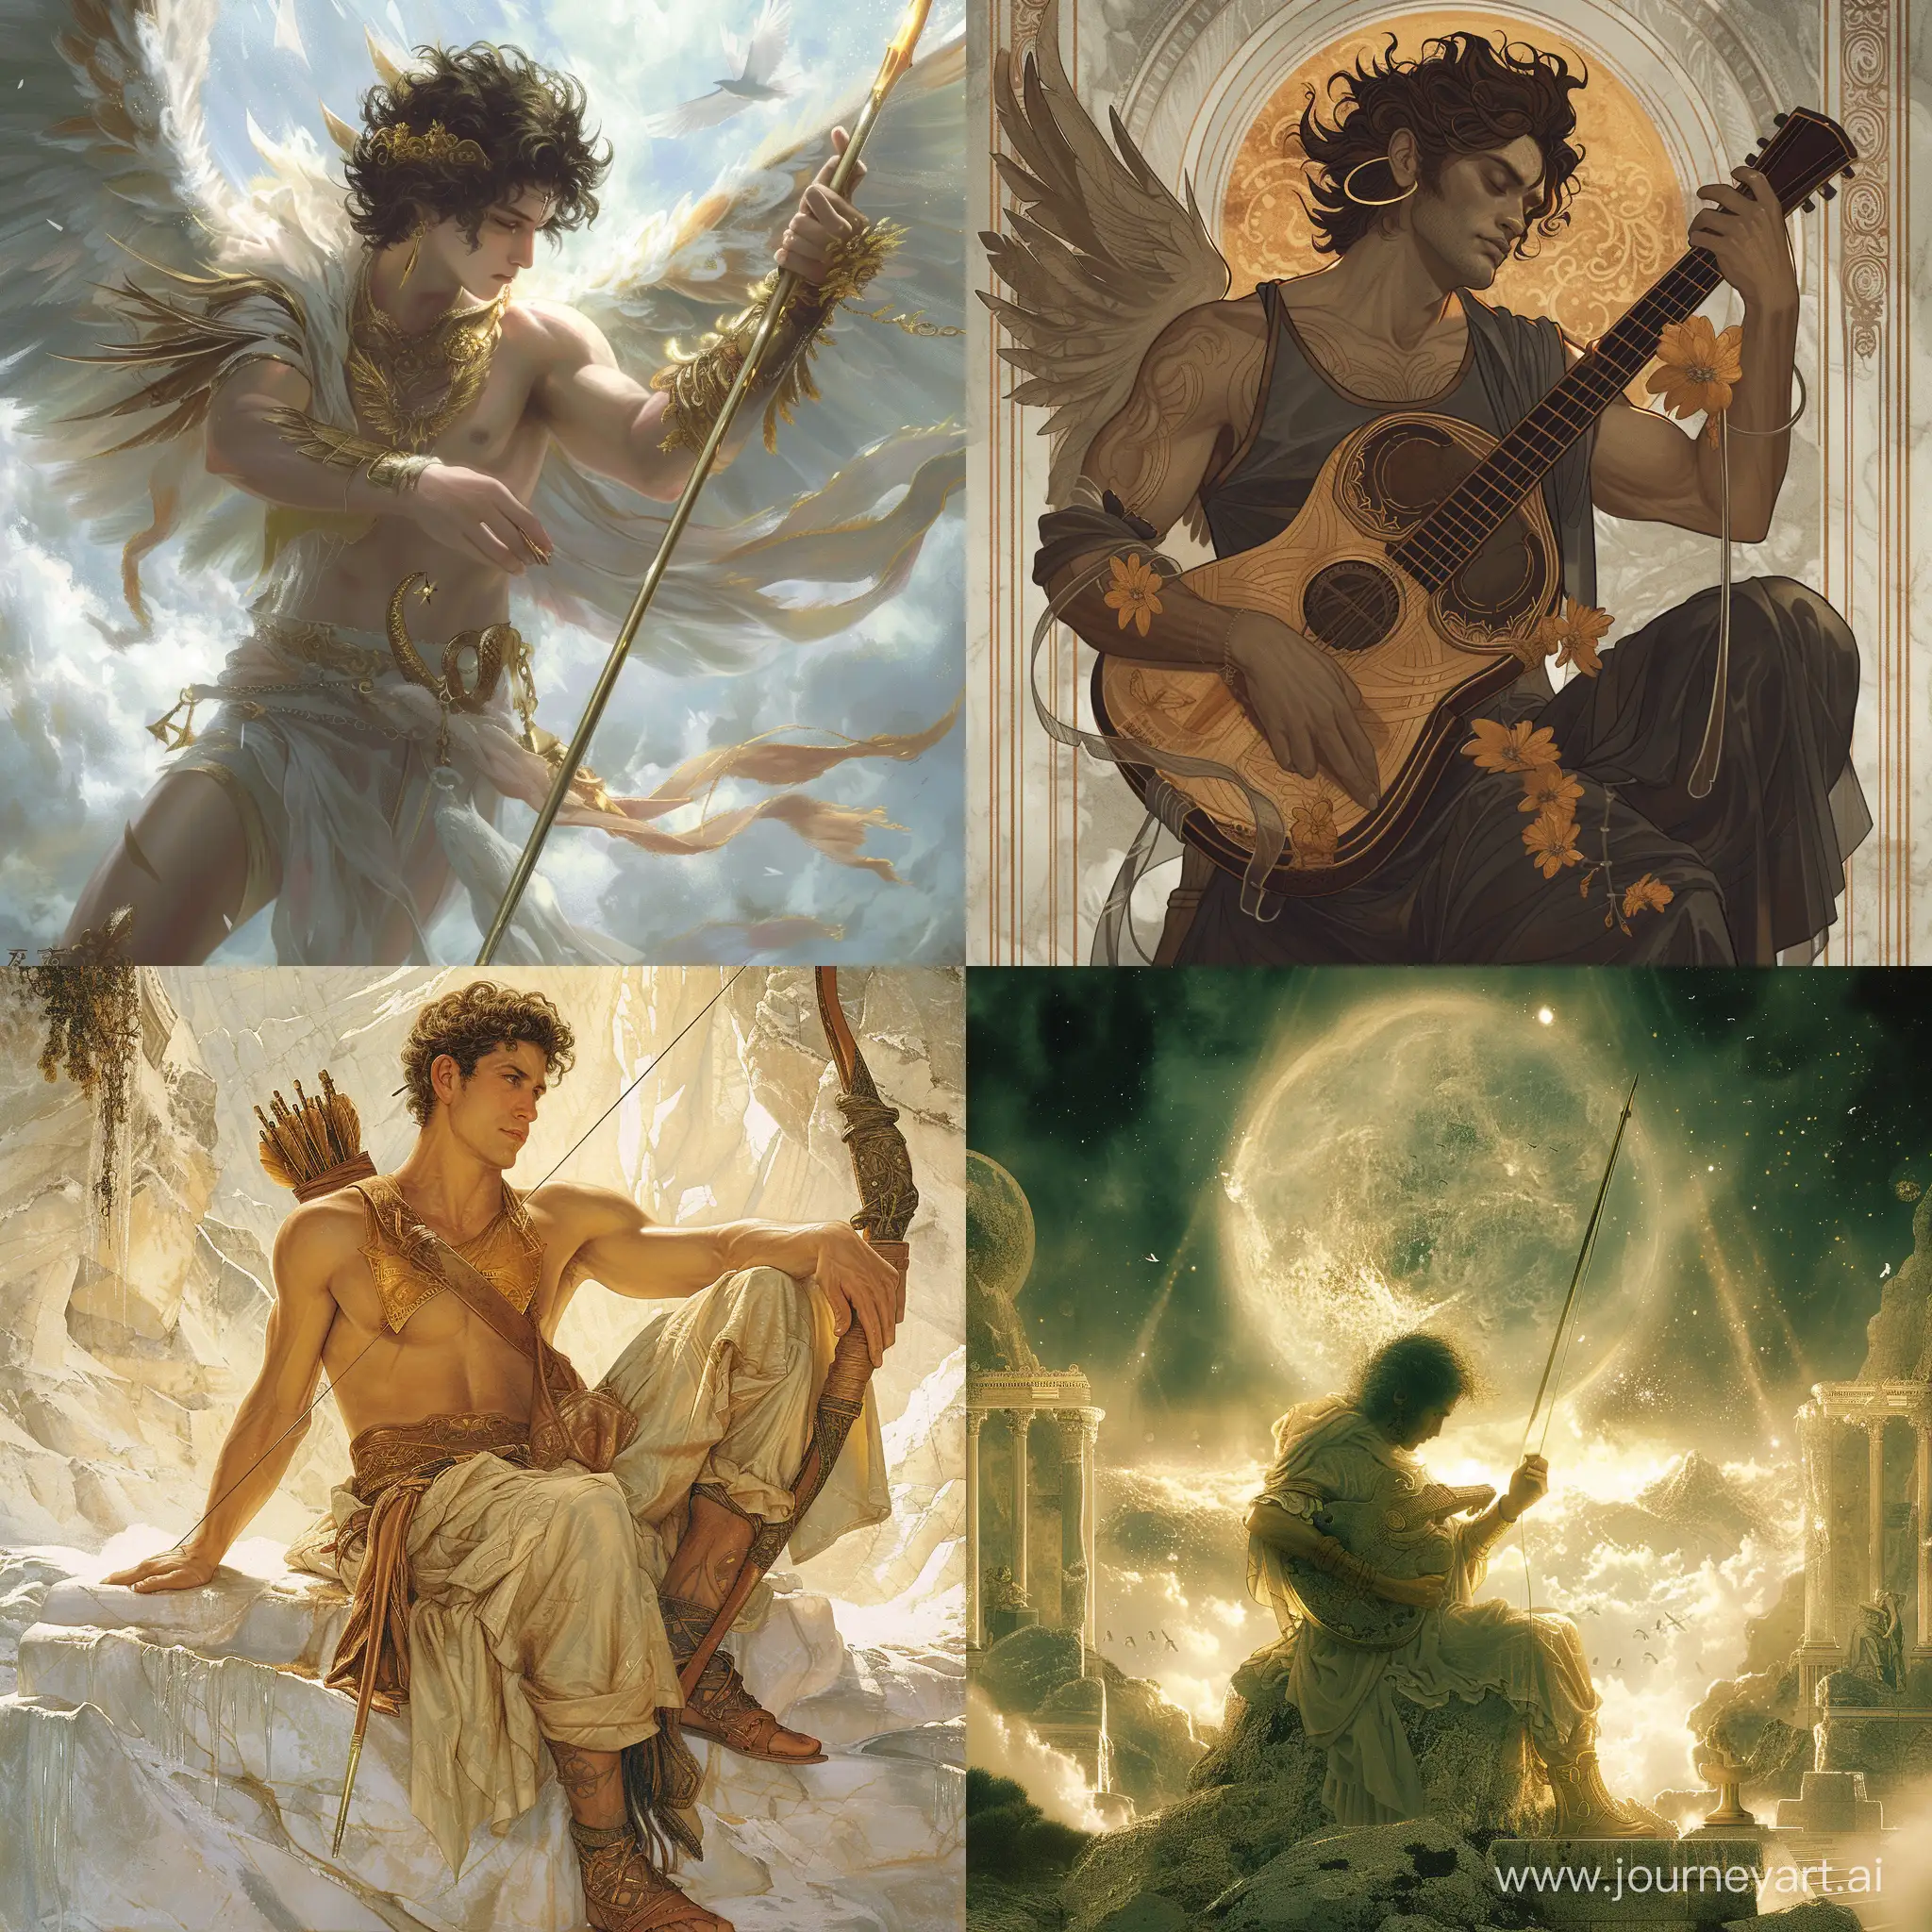 Eternal-Youth-and-Melodies-The-Mysterious-God-Tuaron-of-Mount-Olympus